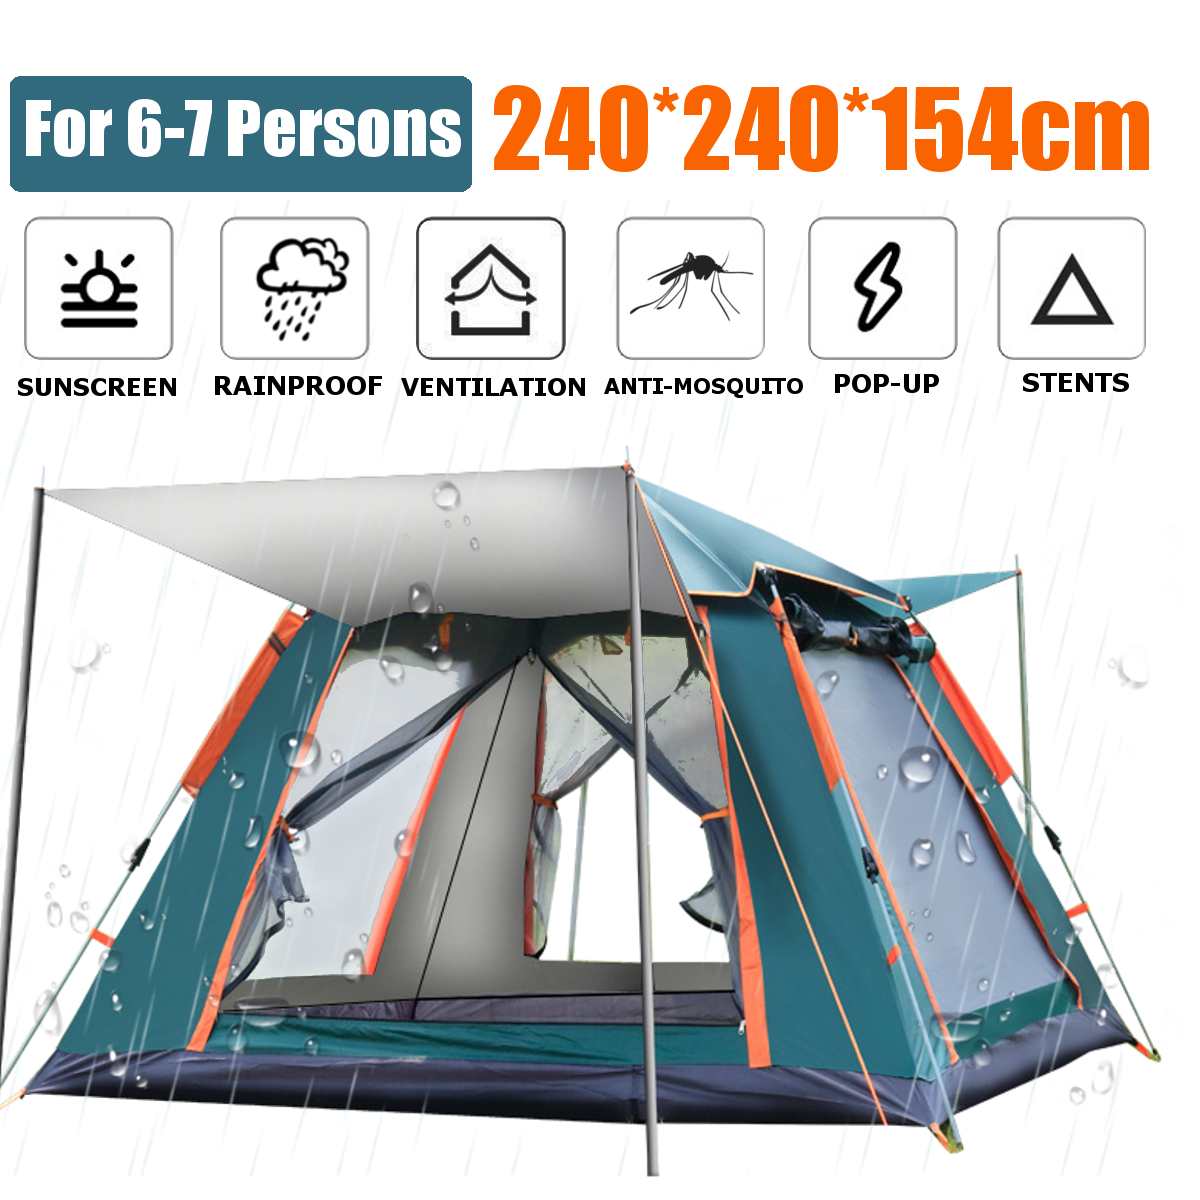 Cheap Goat Tents 6 7 People Large Tent Quick Setup Family Tent Outdoor Camping tent foldable folding tents two layer backpack tents sunshade Tents 